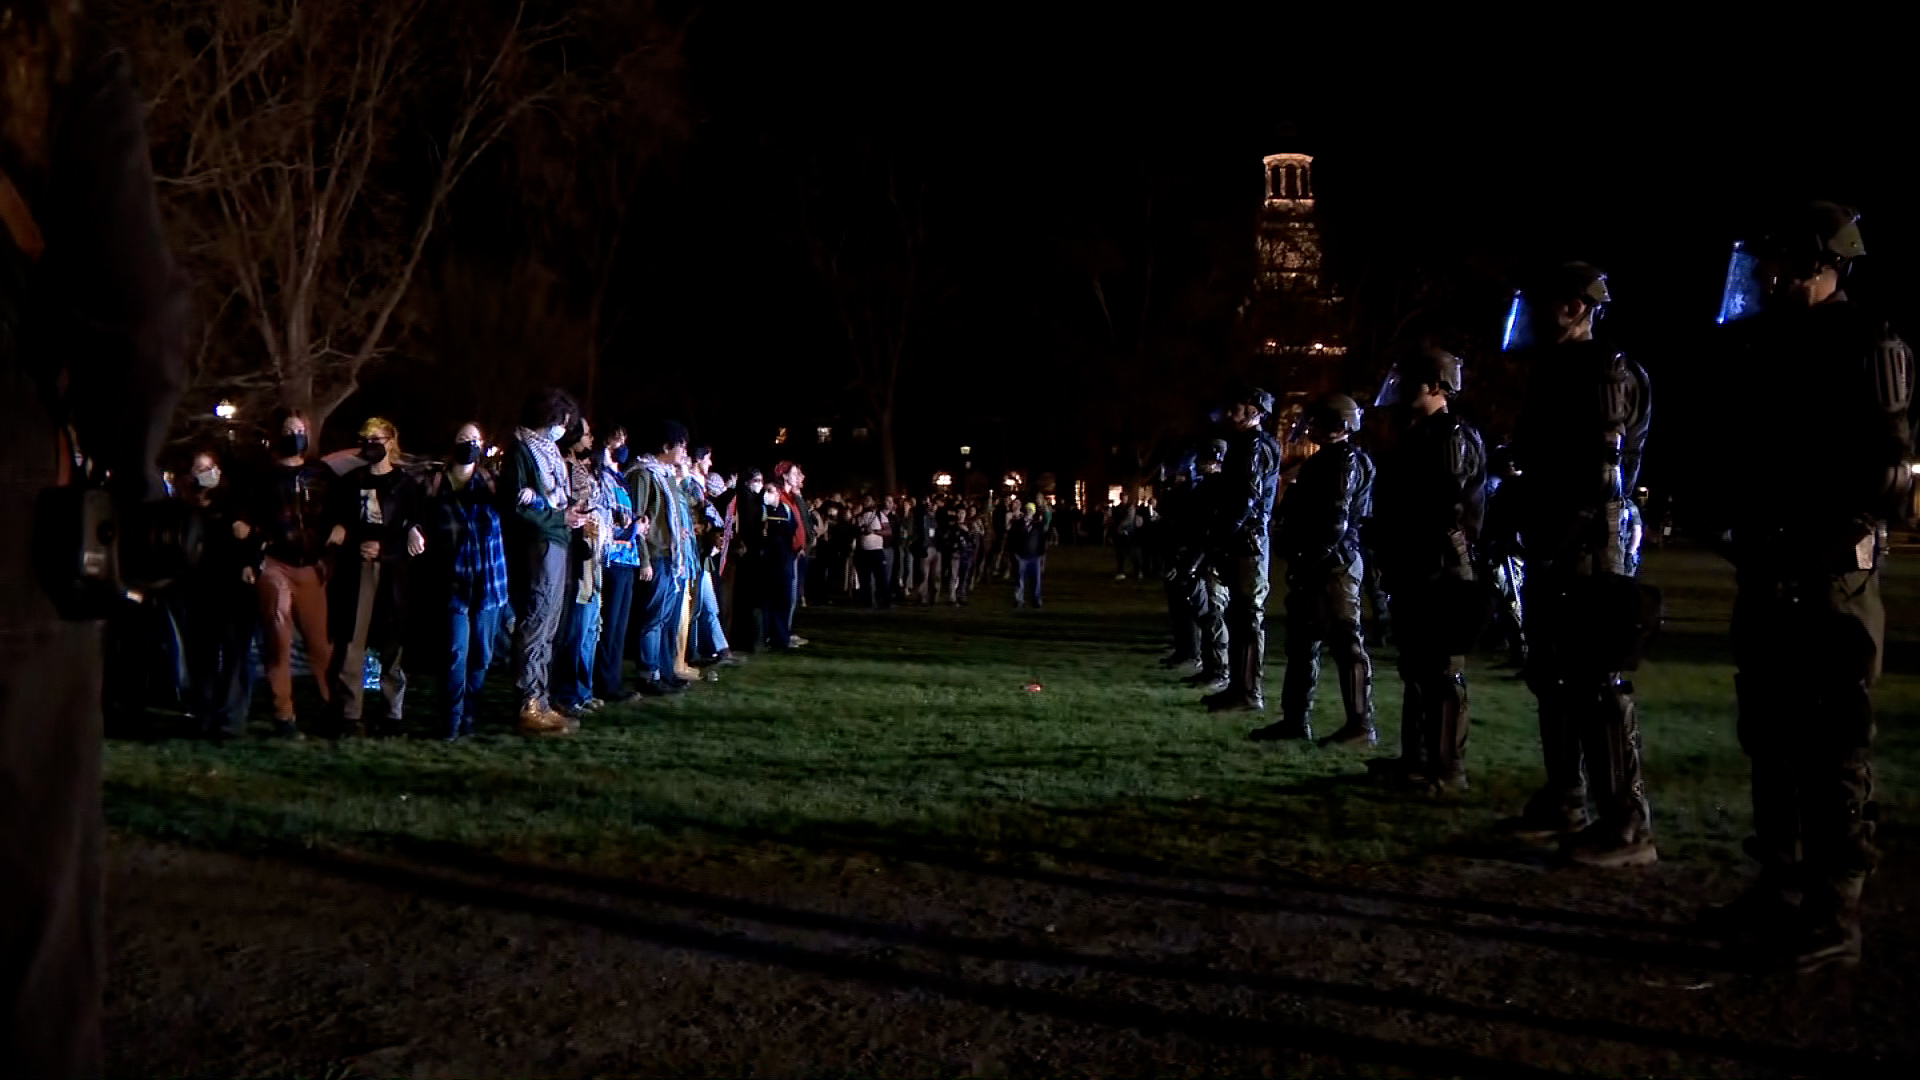 Police arrest several protesters at Dartmouth College on Wednesday night.